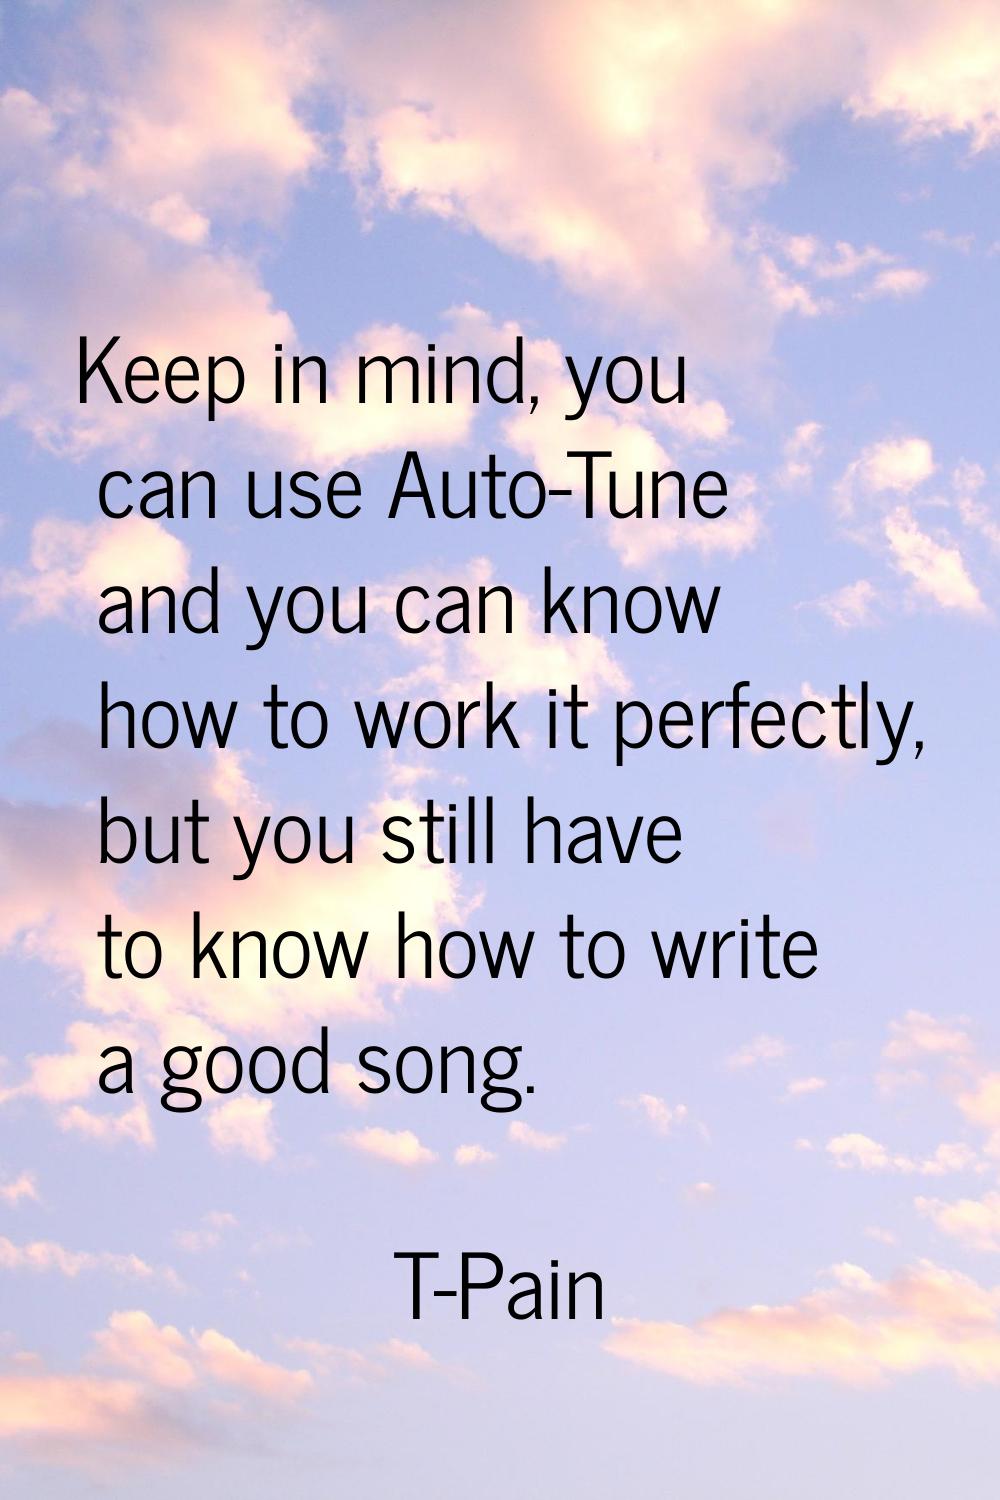 Keep in mind, you can use Auto-Tune and you can know how to work it perfectly, but you still have t